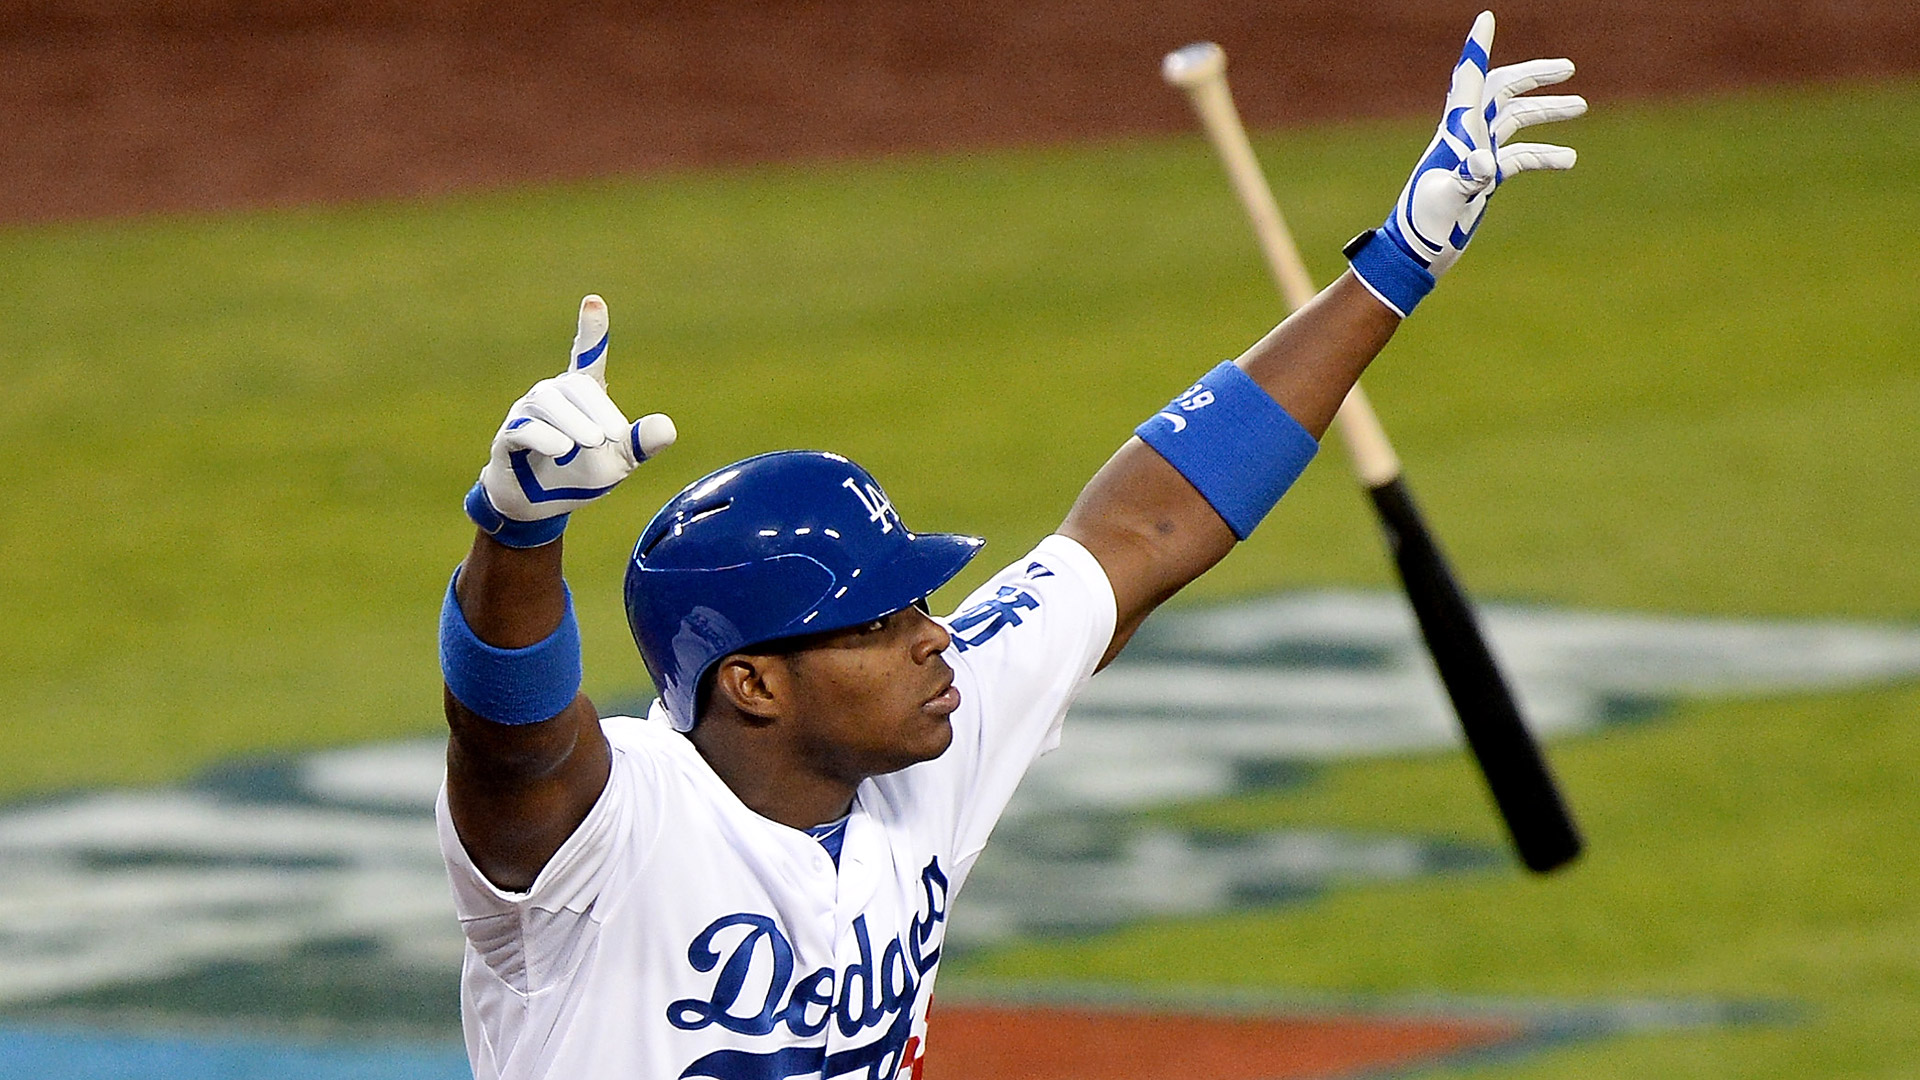 The many emotions of the Los Angeles Dodgers' Yasiel Puig